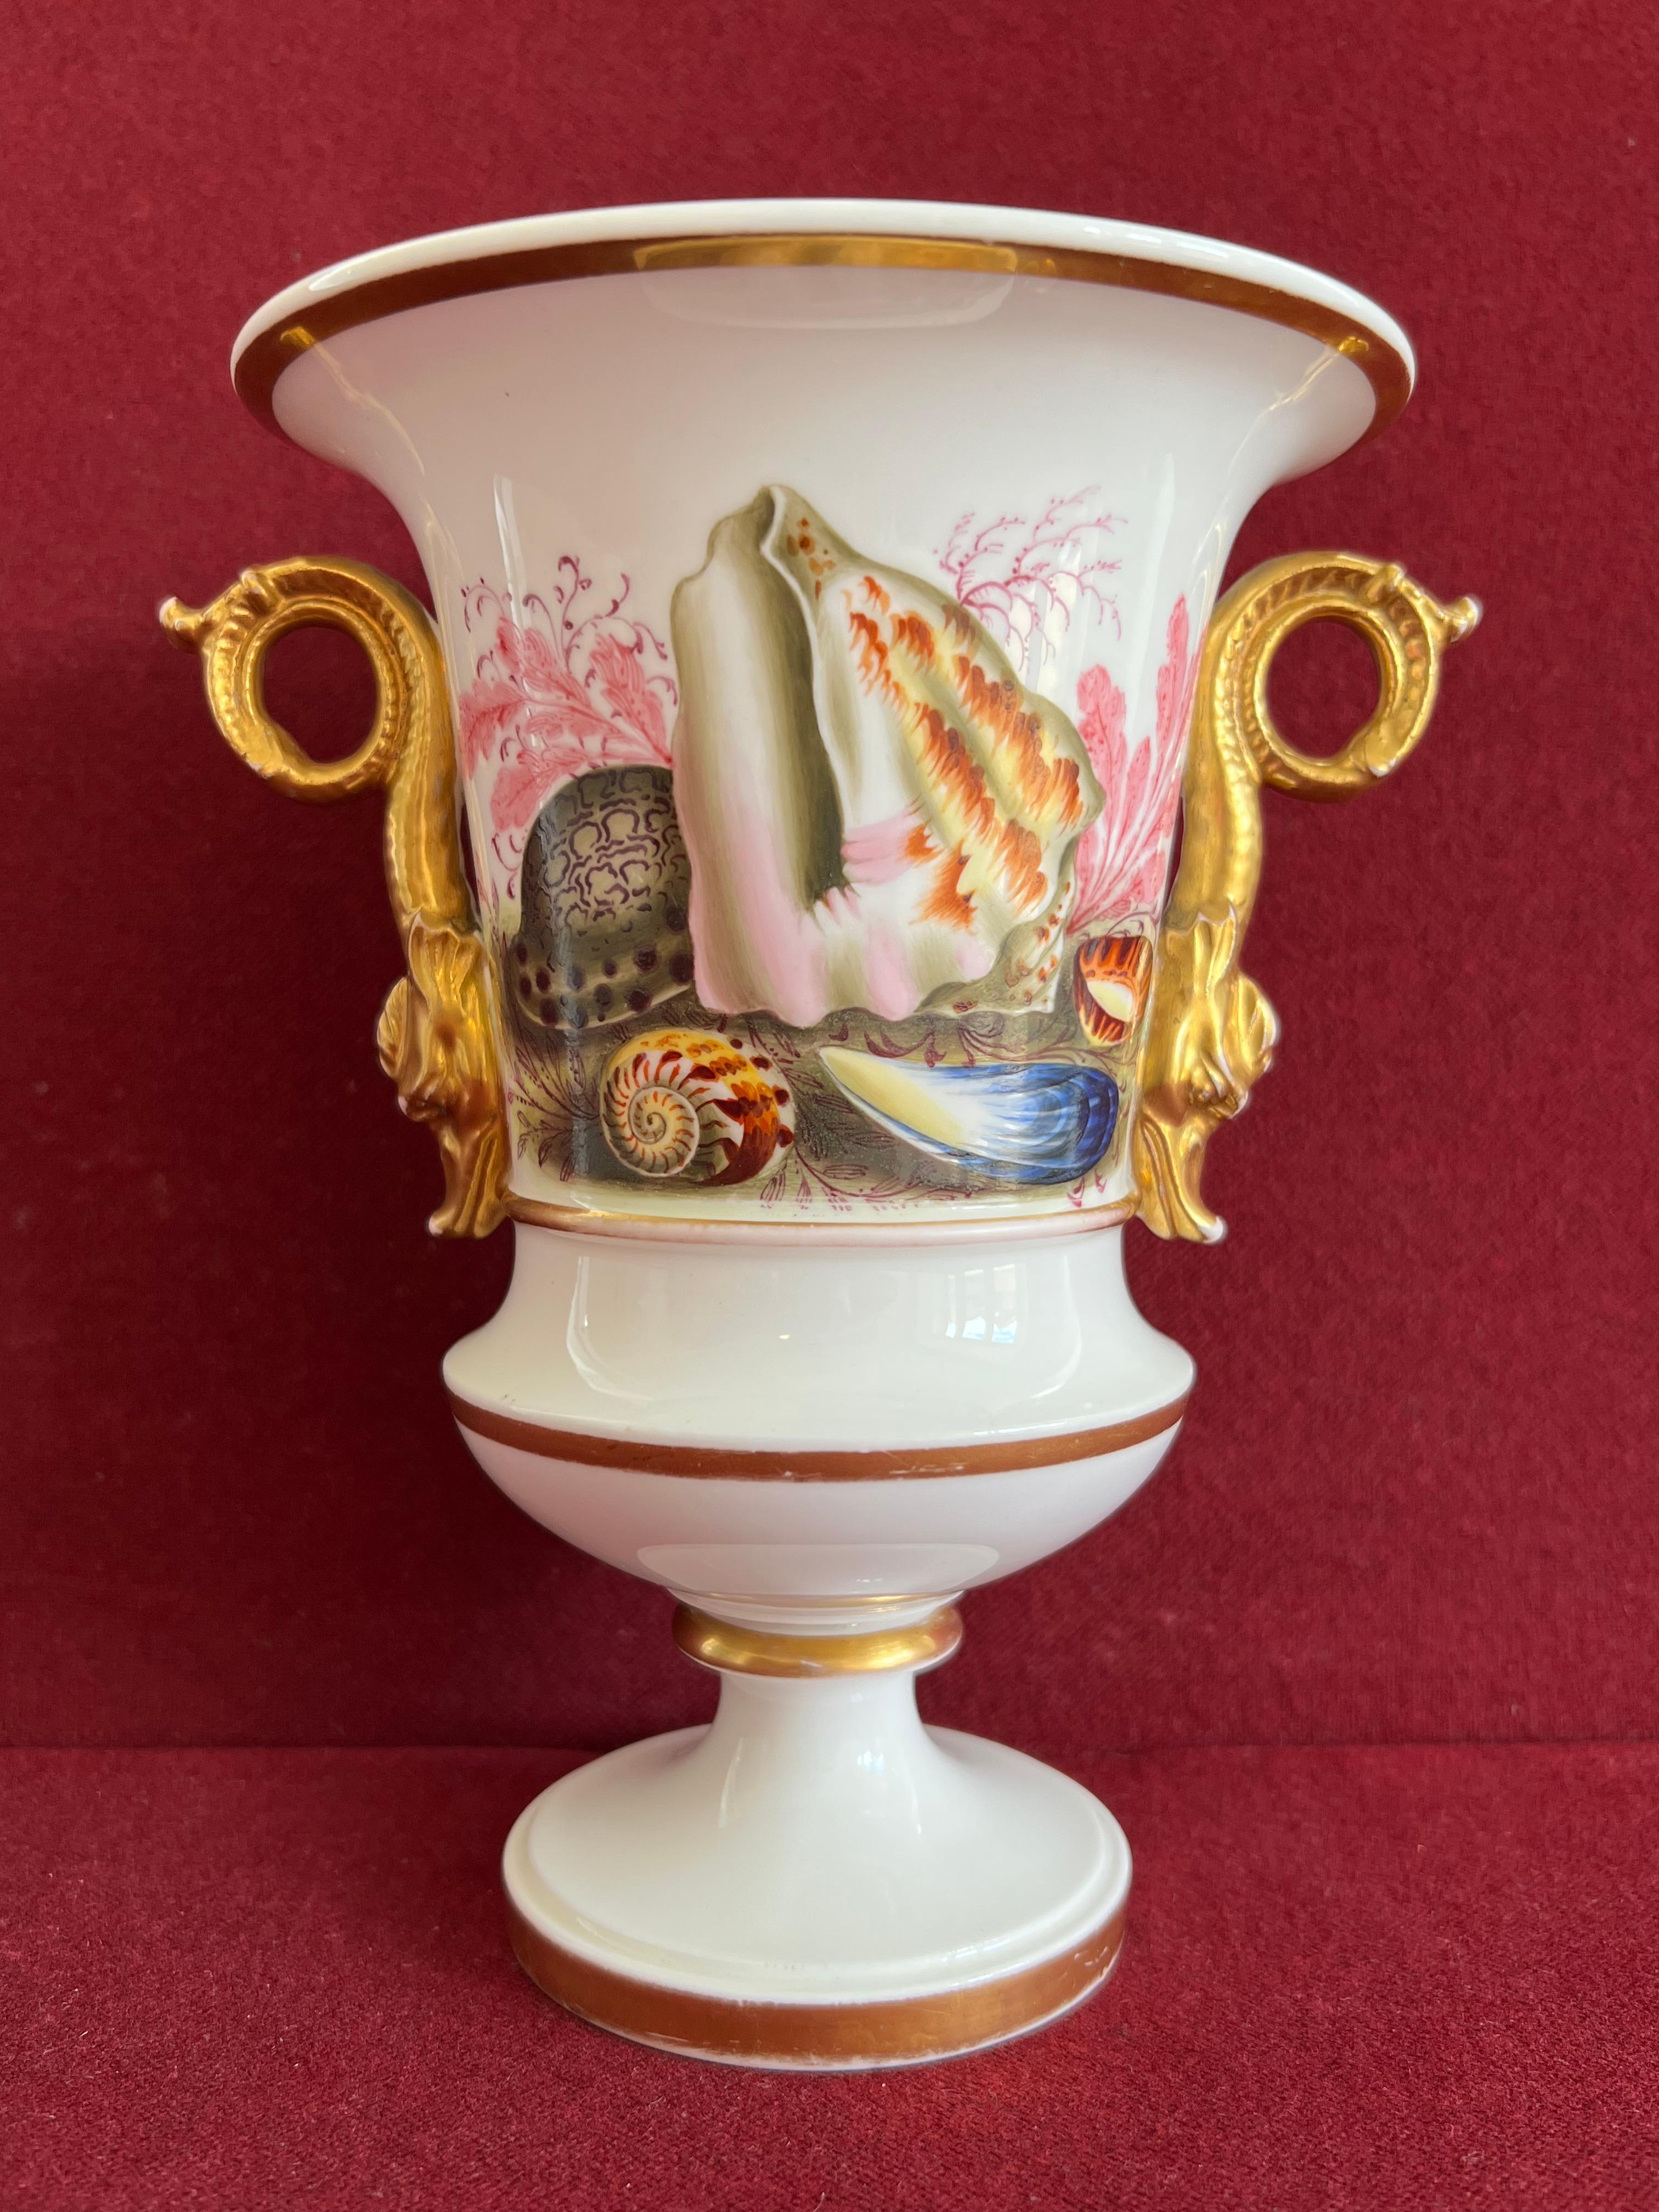 Rare Spode Porcelain Shell Decorated Vase Pattern 3930 C.1824 In Good Condition For Sale In Exeter, GB